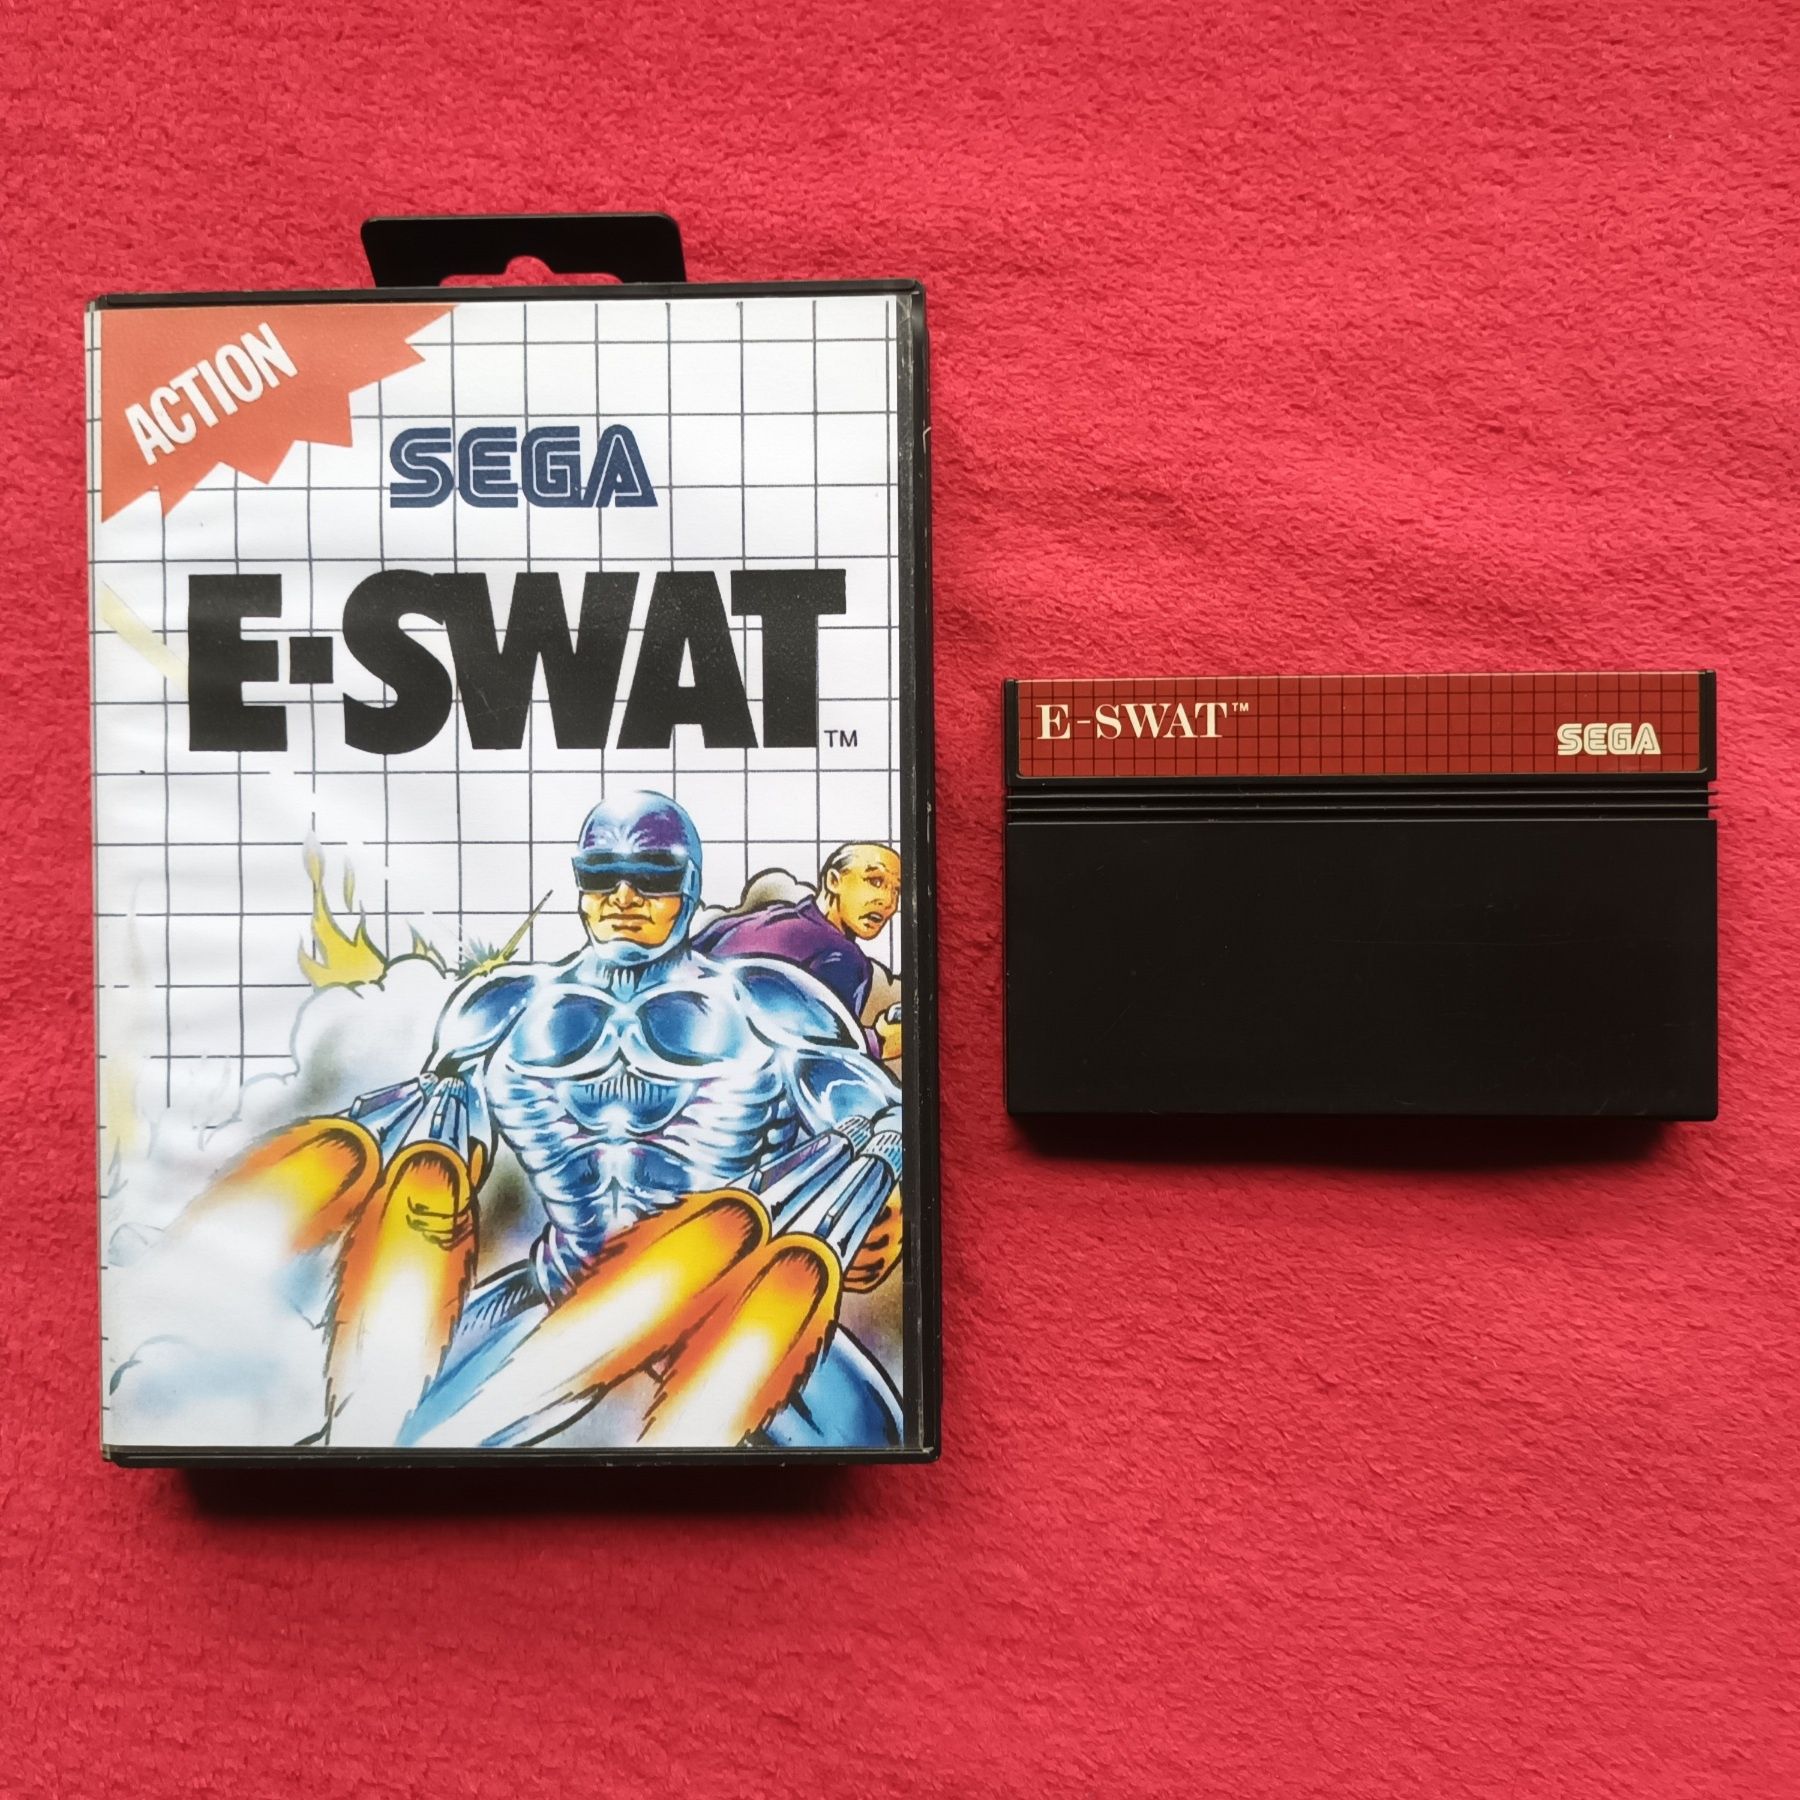 E-Swat Master System